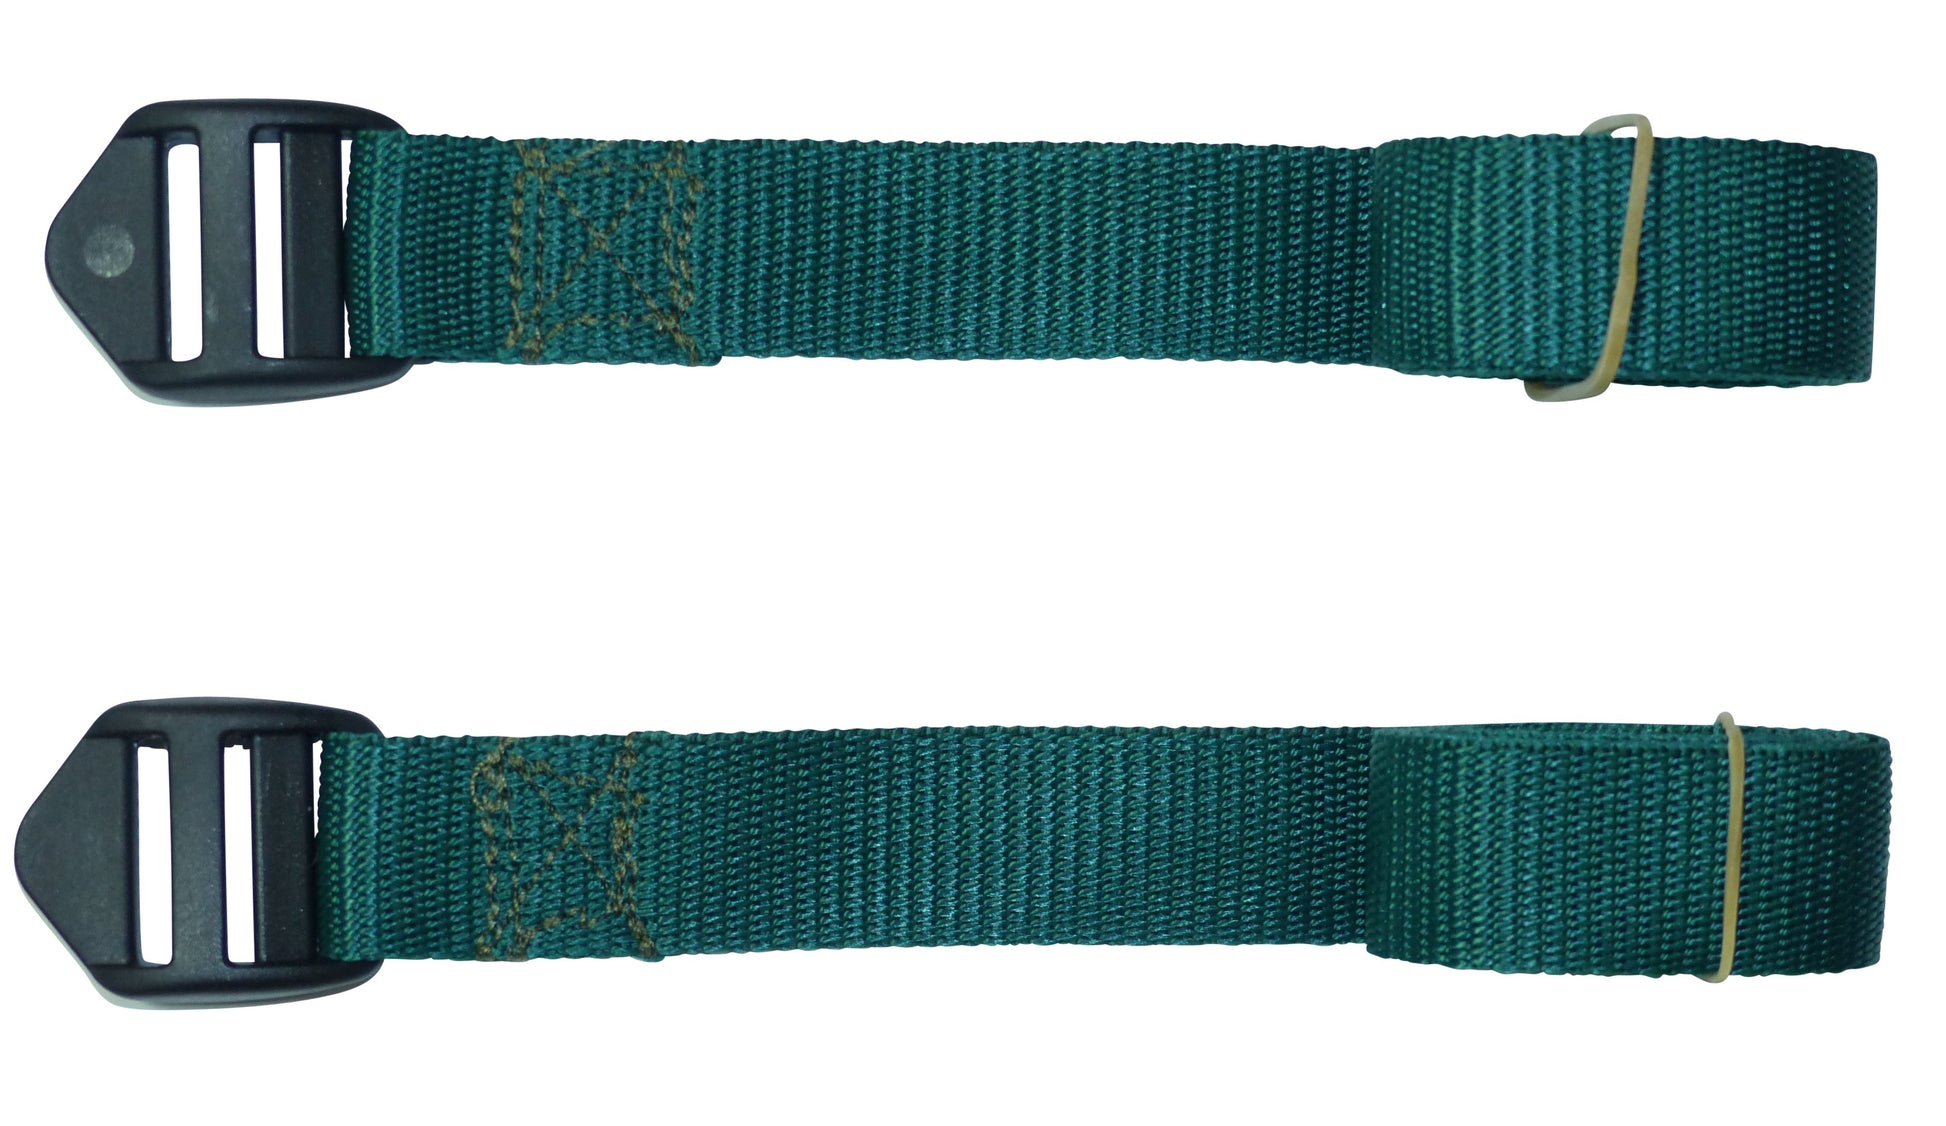 Benristraps 25mm Webbing Strap with Superstrong Ladderlock Buckle (Pair) in emerald